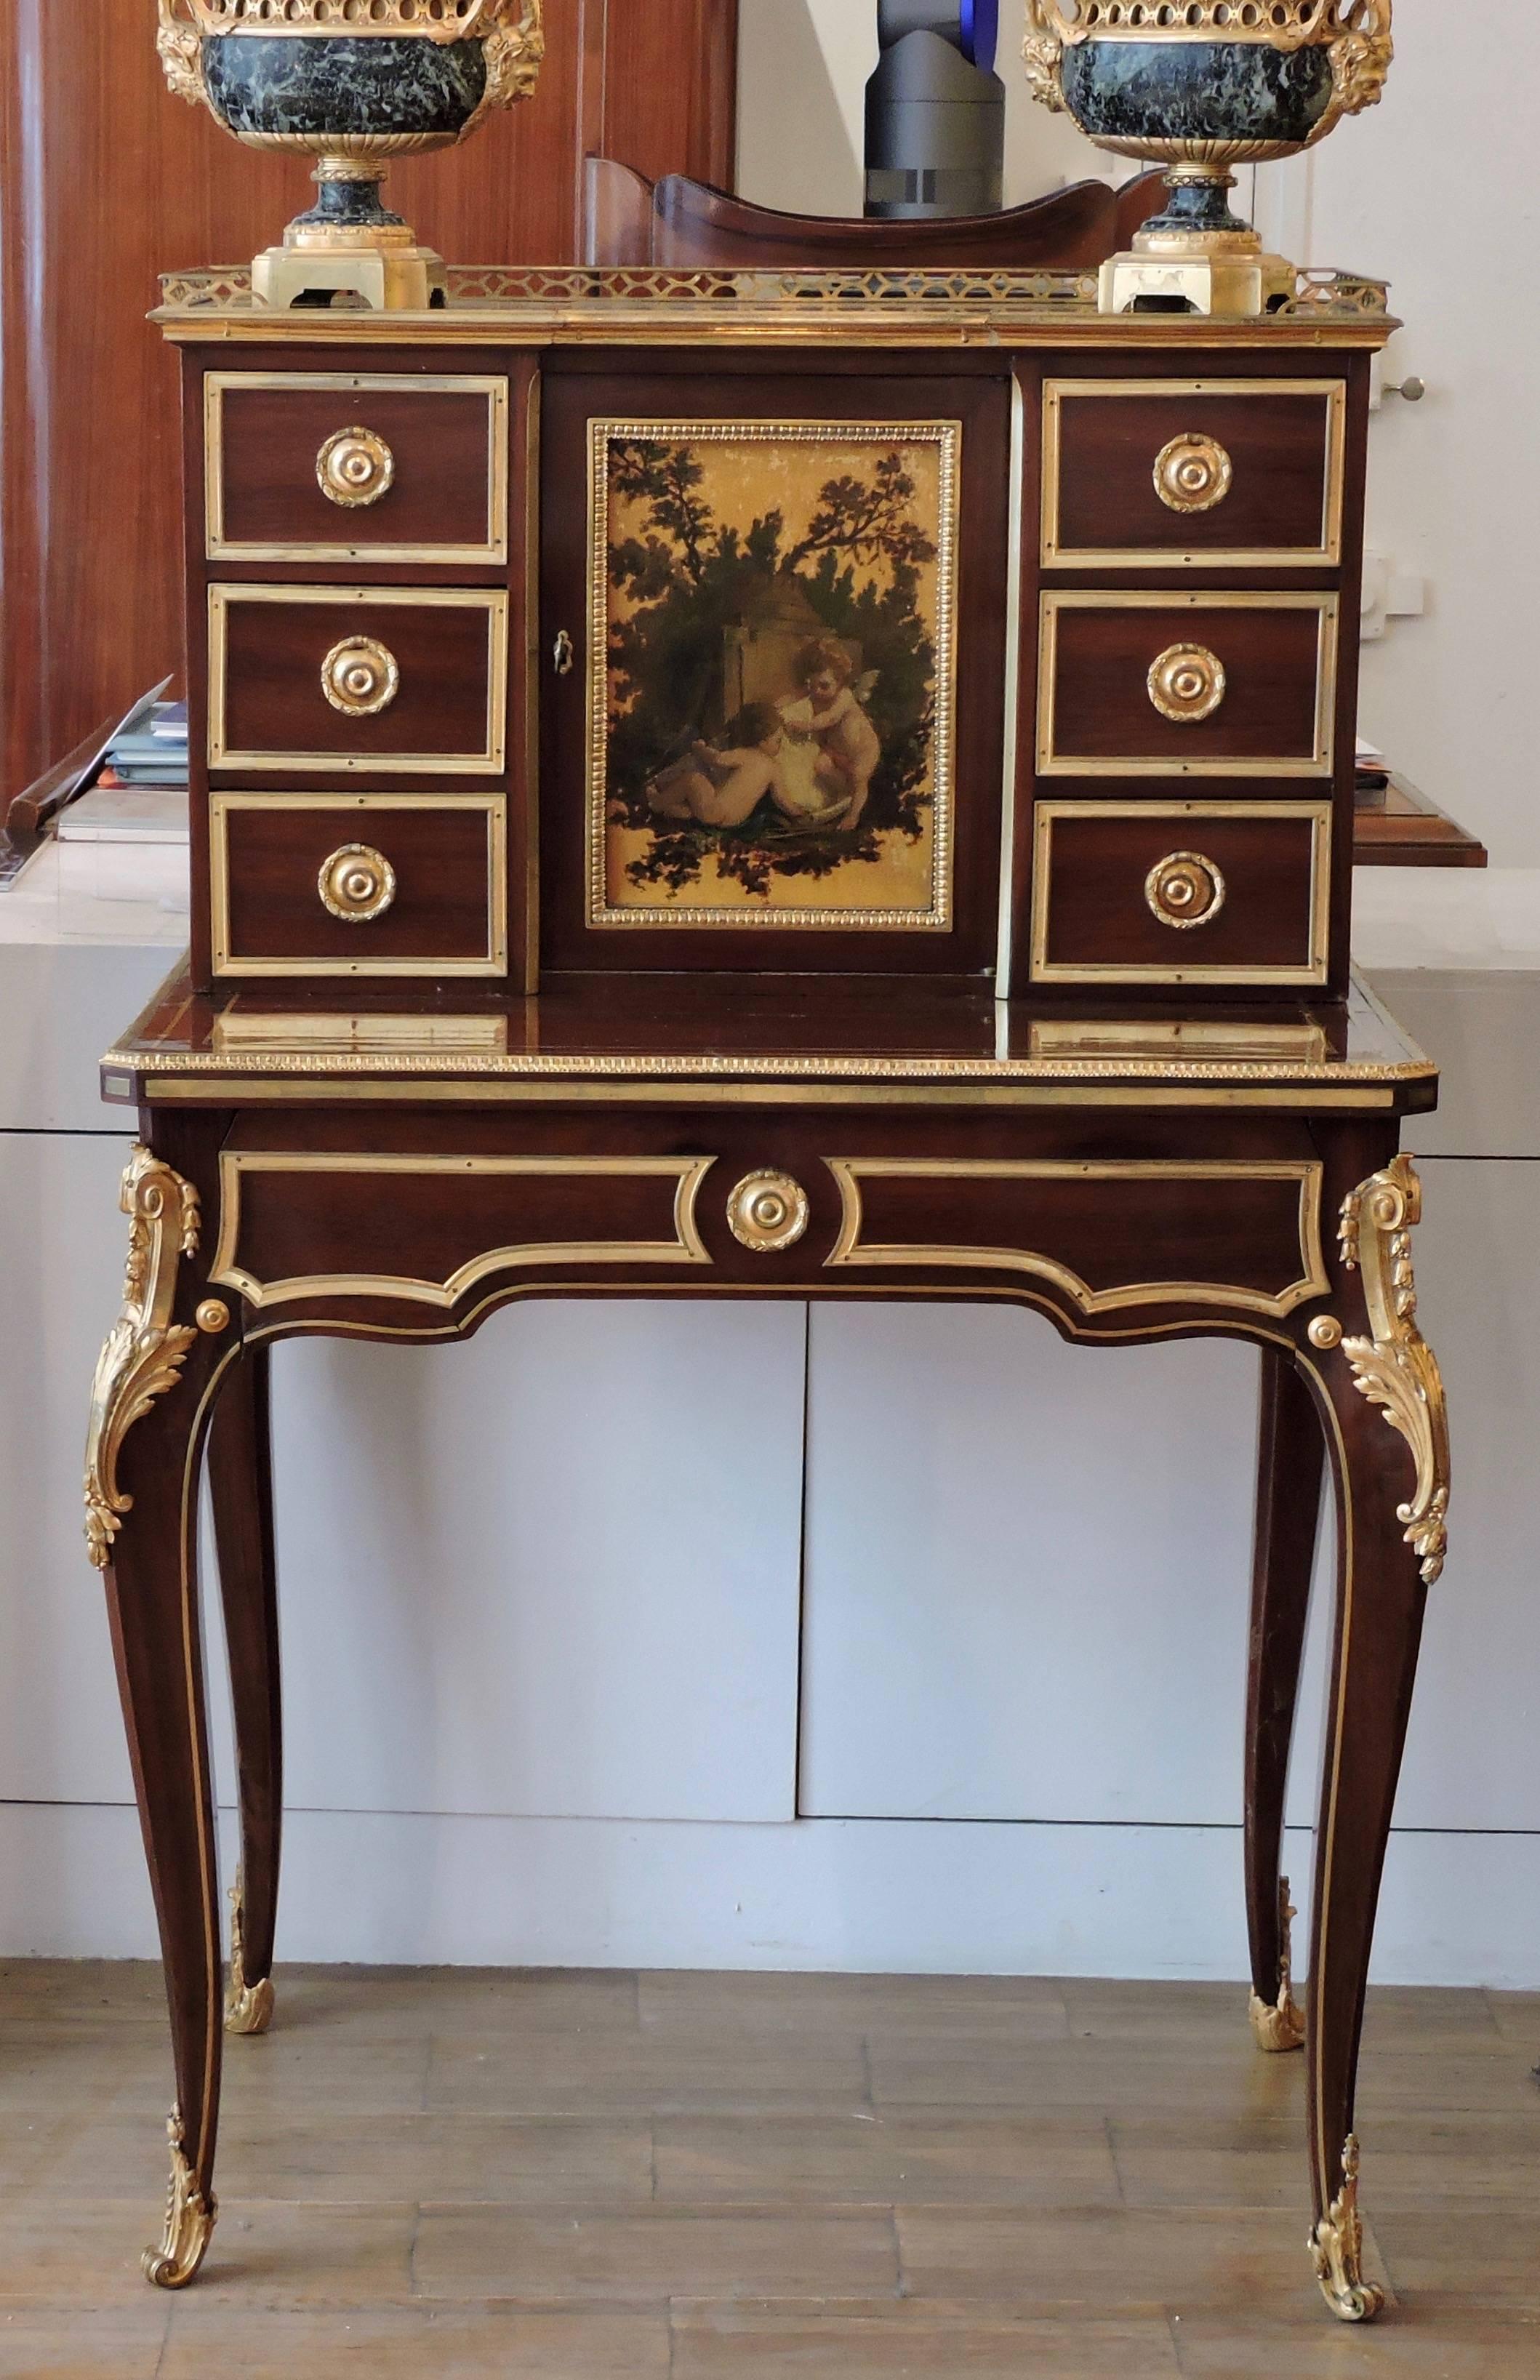 A 19th century French ormolu-mounted mahogany and Vernis Martin Bonheur du Jour
The upper structure with central door with two Putti design Vernis Martin Panel flanked by six Drawers surmounted by a Red Griotte marble top, over writing surface and